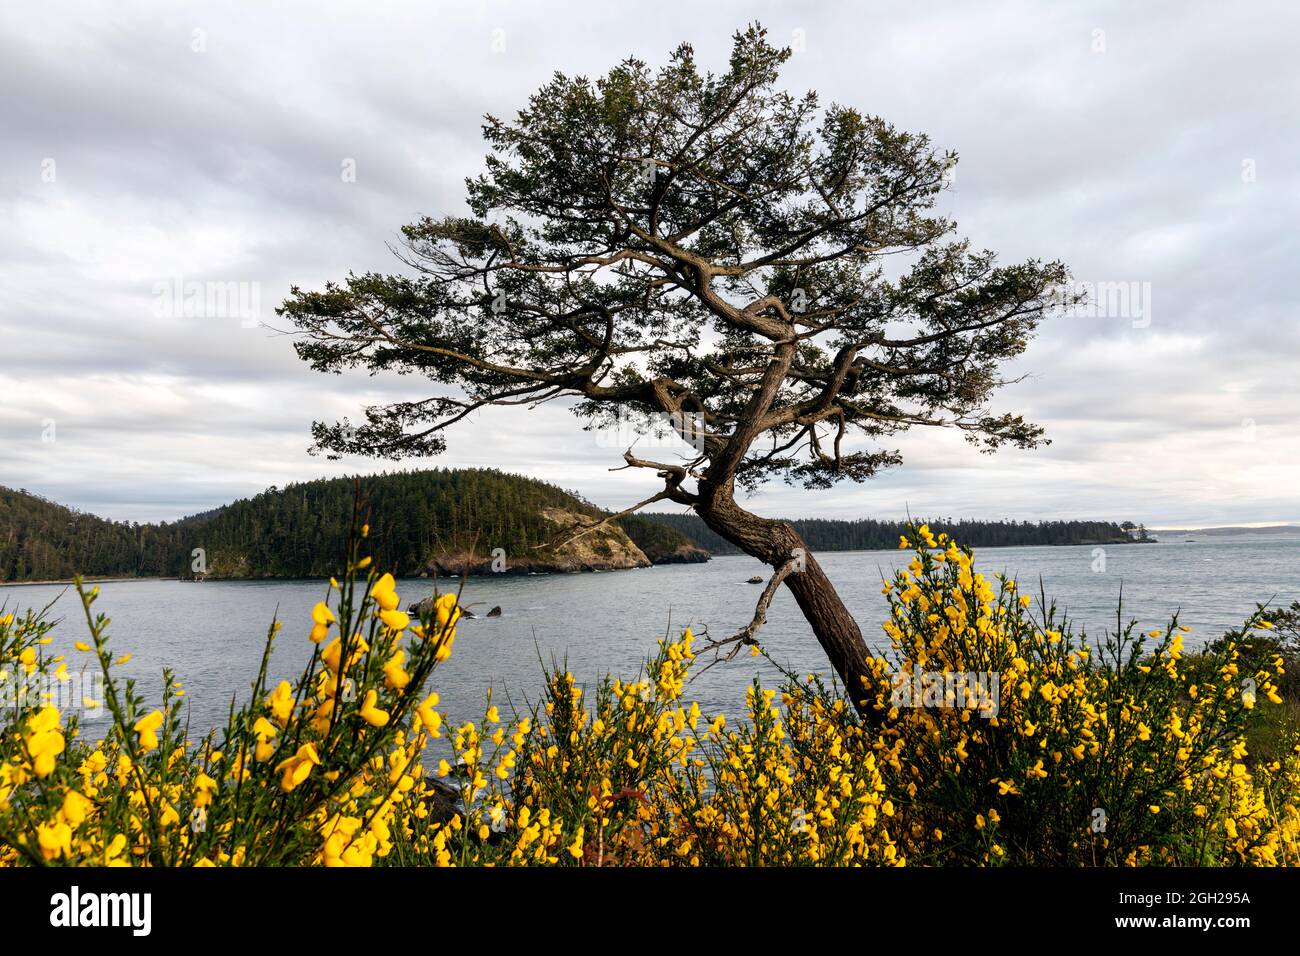 WA20234-00....WASHINGTON - Twisted tree on the edge of Sharp Cove and Bowman Bay in Deception Pass State Park. Stock Photo